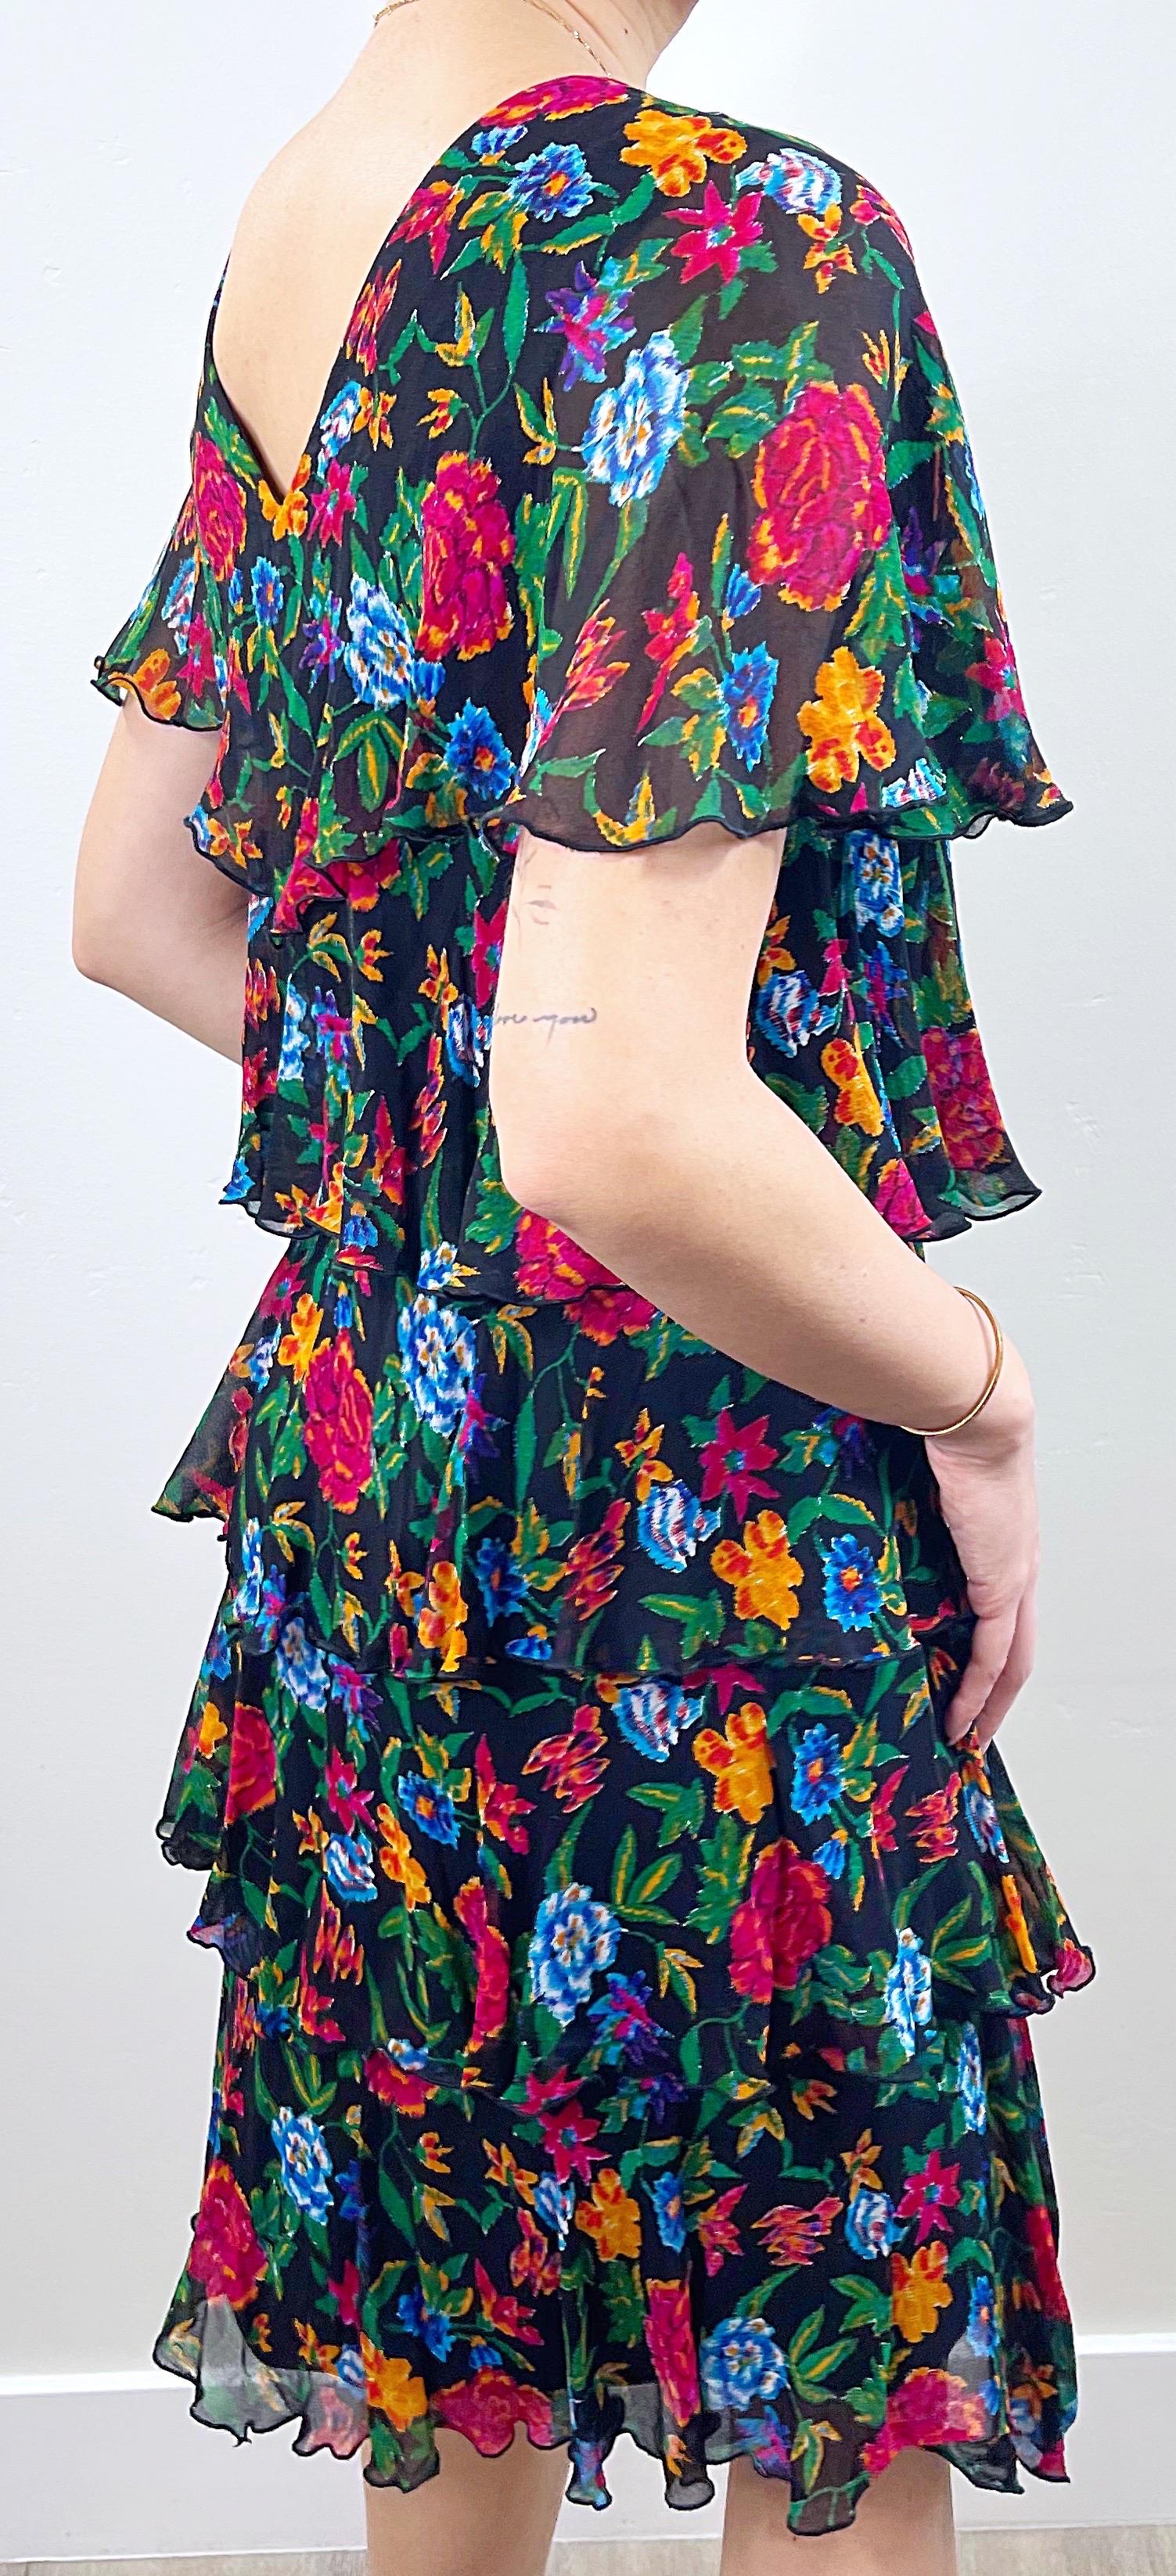 1970s Holly’s Harp Silk Chiffon Colorful Flower Print Tiered Vintage 70s Dress For Sale 8